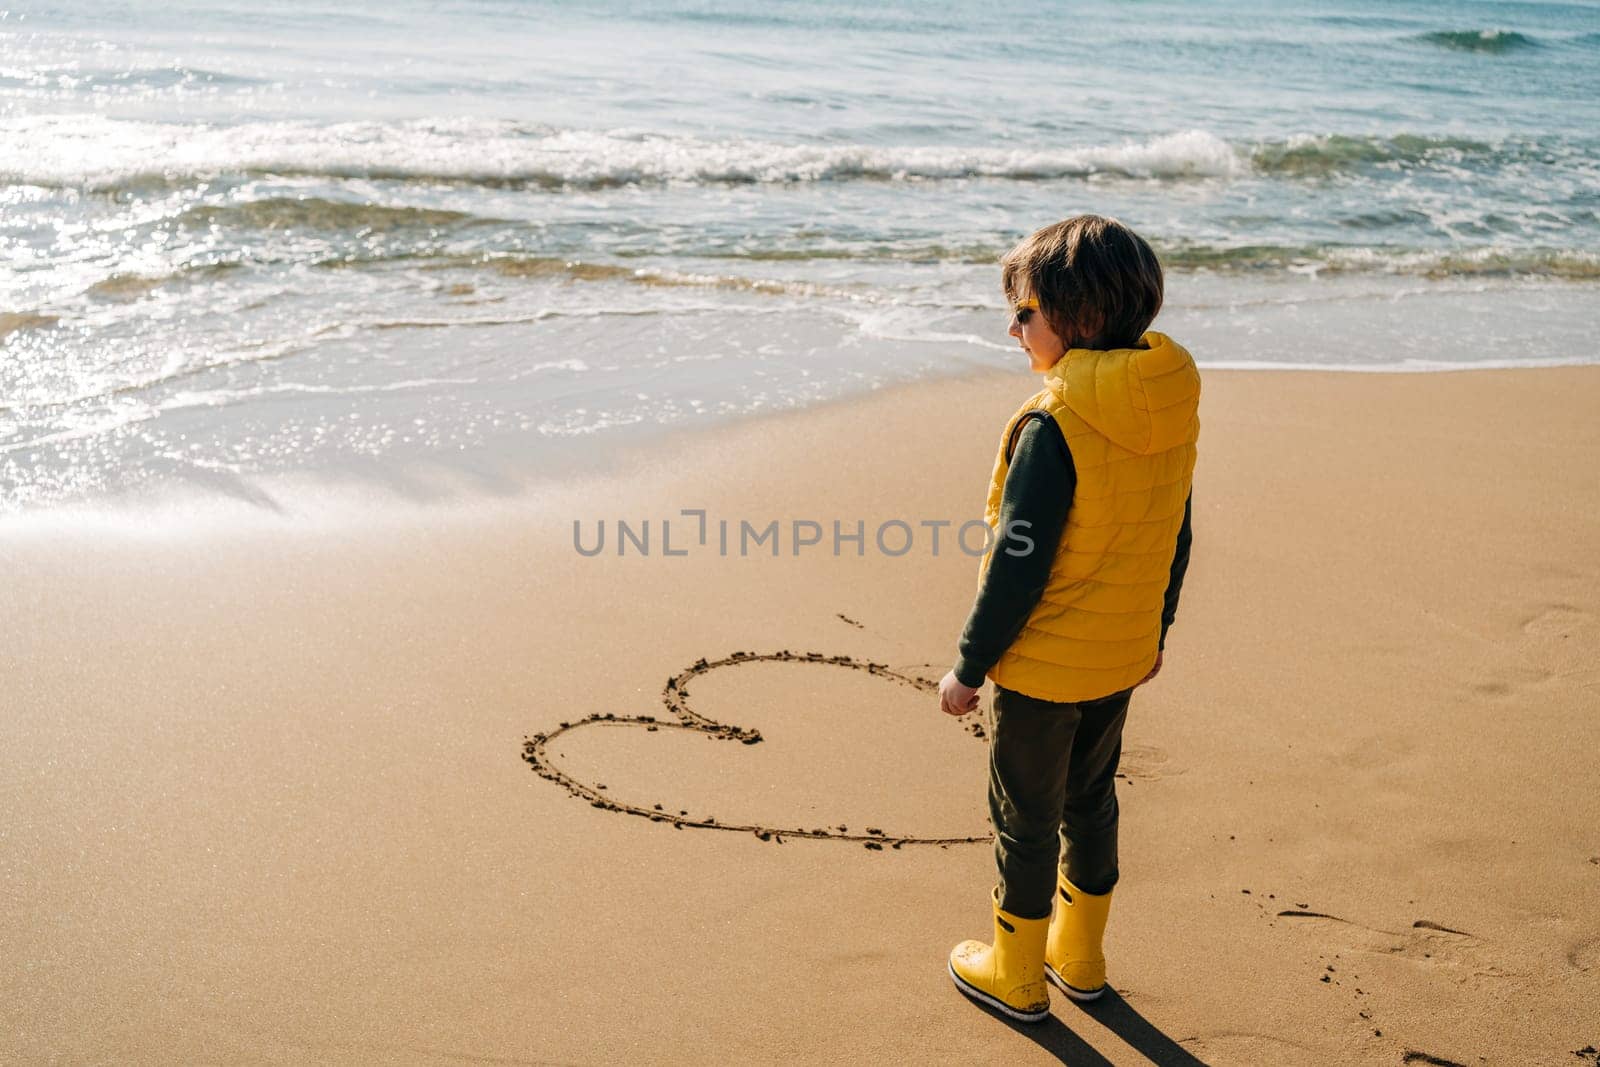 Boy in yellow rubber boots drawing heart shape on sand at the beach. School kid touching water at autumn winter sea. Child having fun with waves at the shore. Spring Holiday vacation concept.